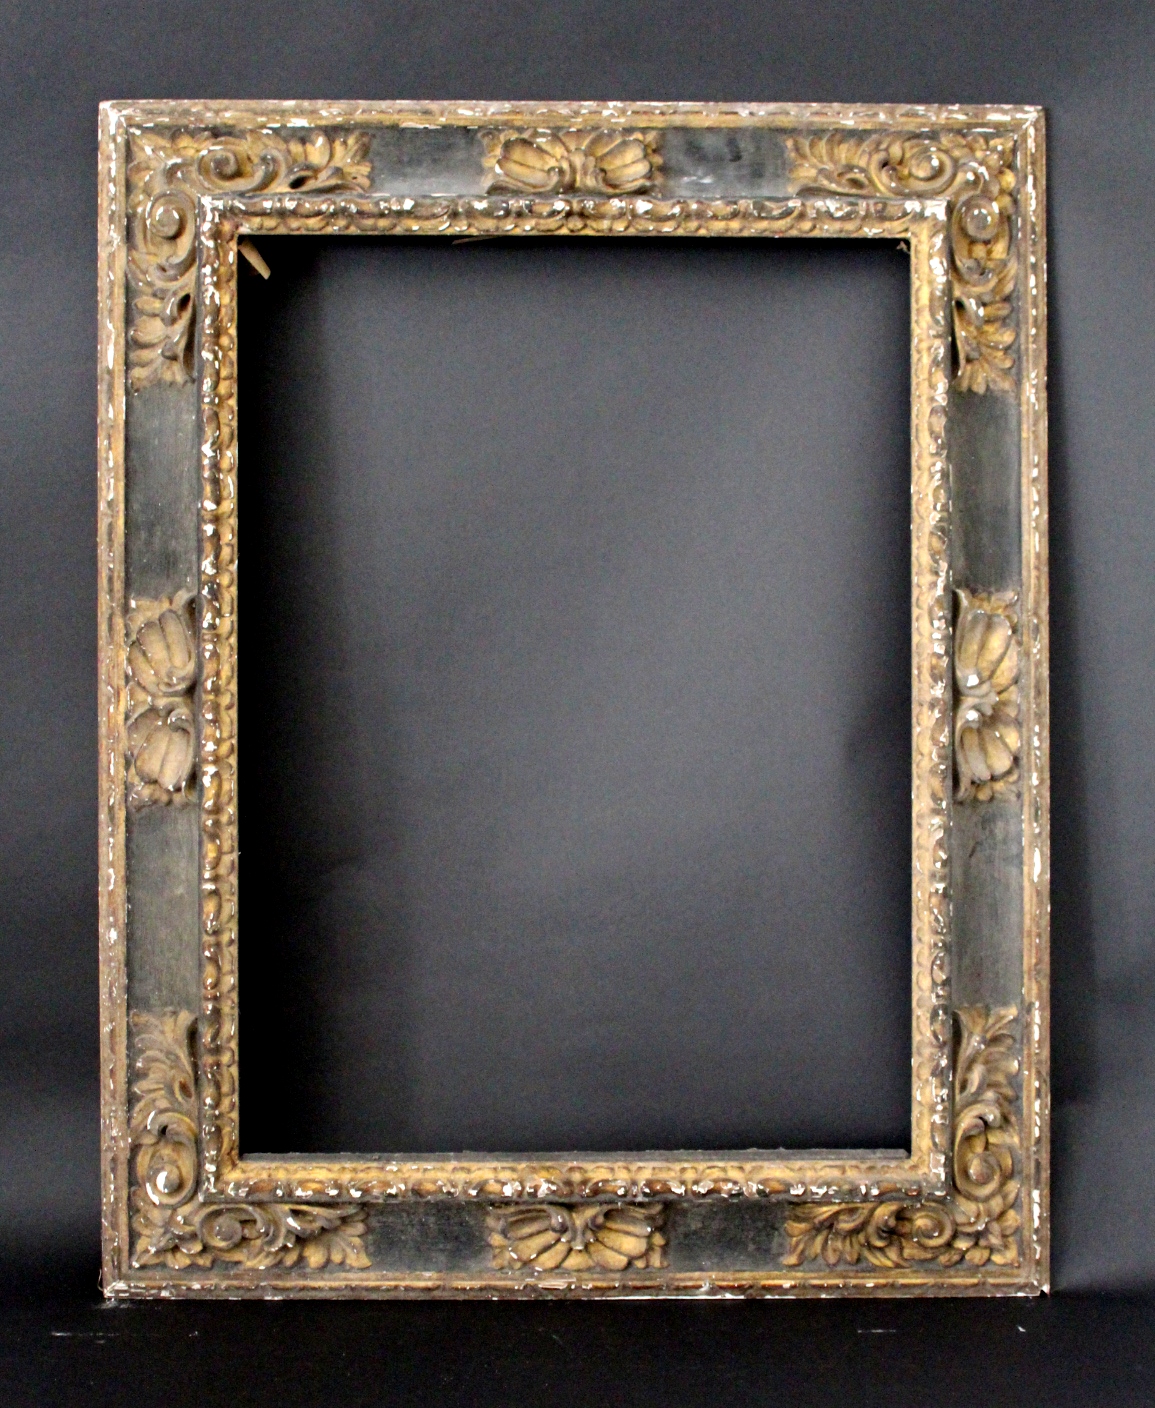 A PICTURE FRAME 19/20th Century, in Spanish Baroque style, carved wood, with gilt leafy scroll